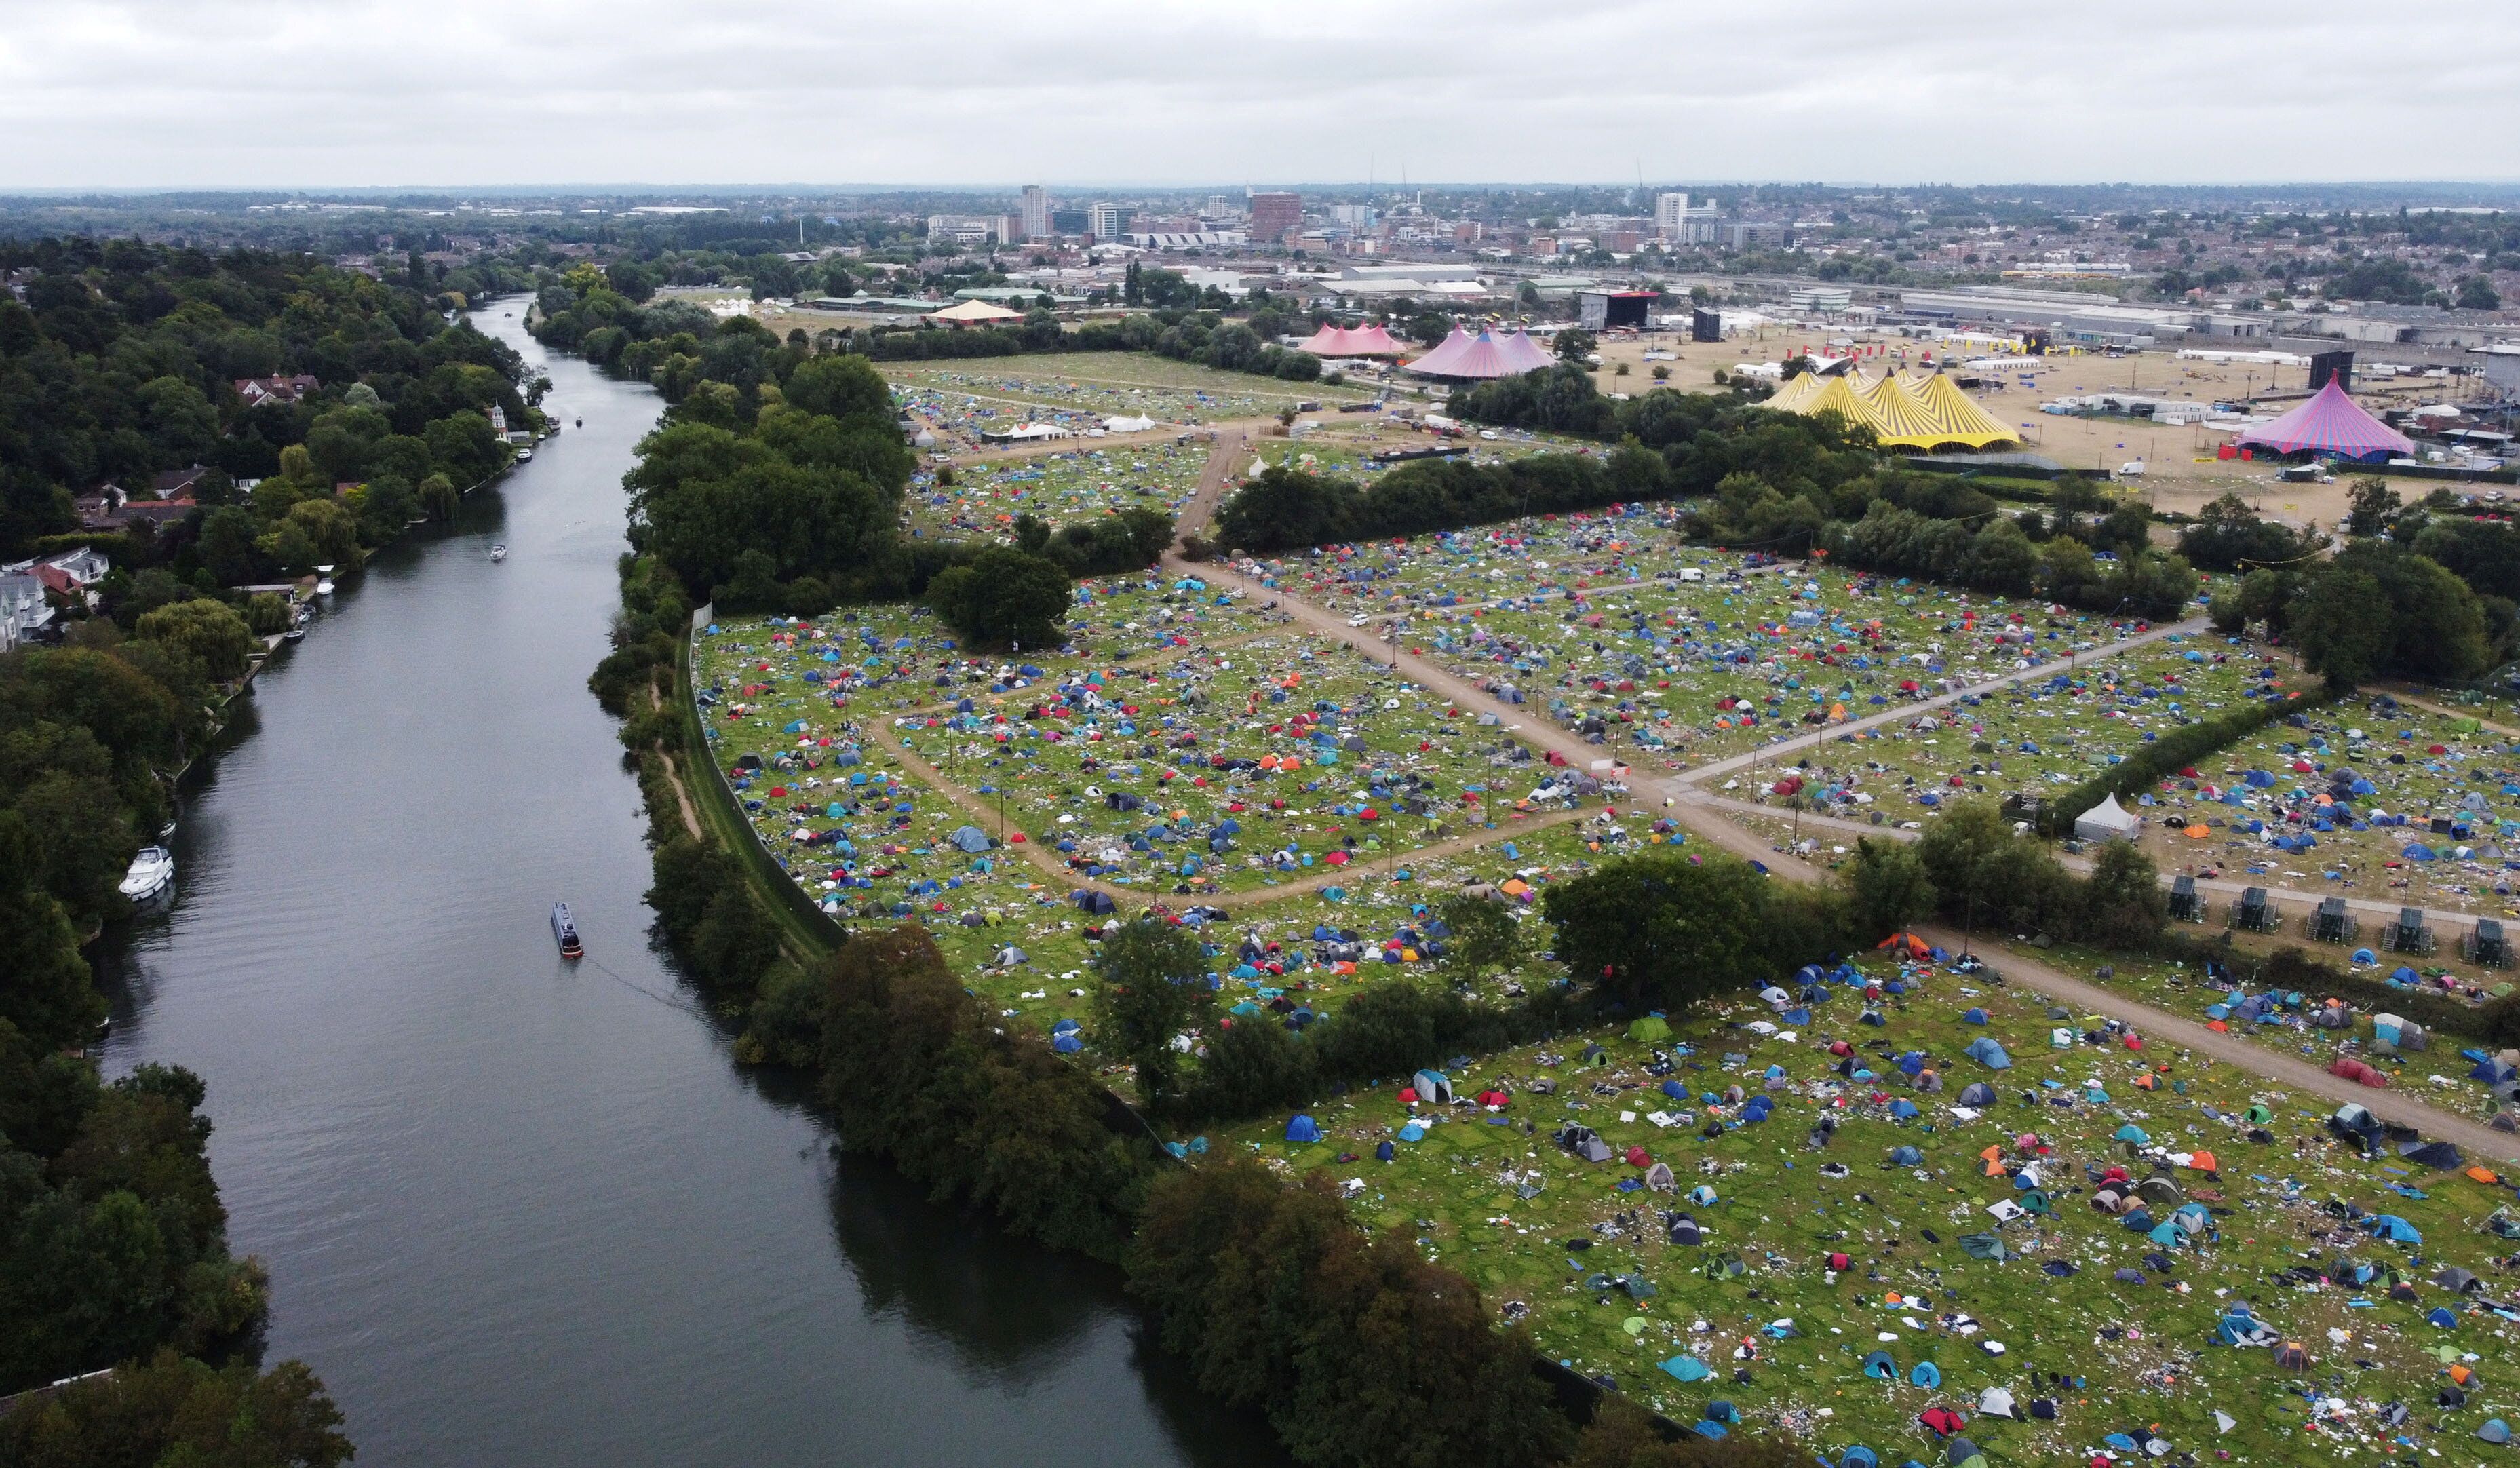 Abandoned tents at the Reading Festival campsite after the event in August 2021.